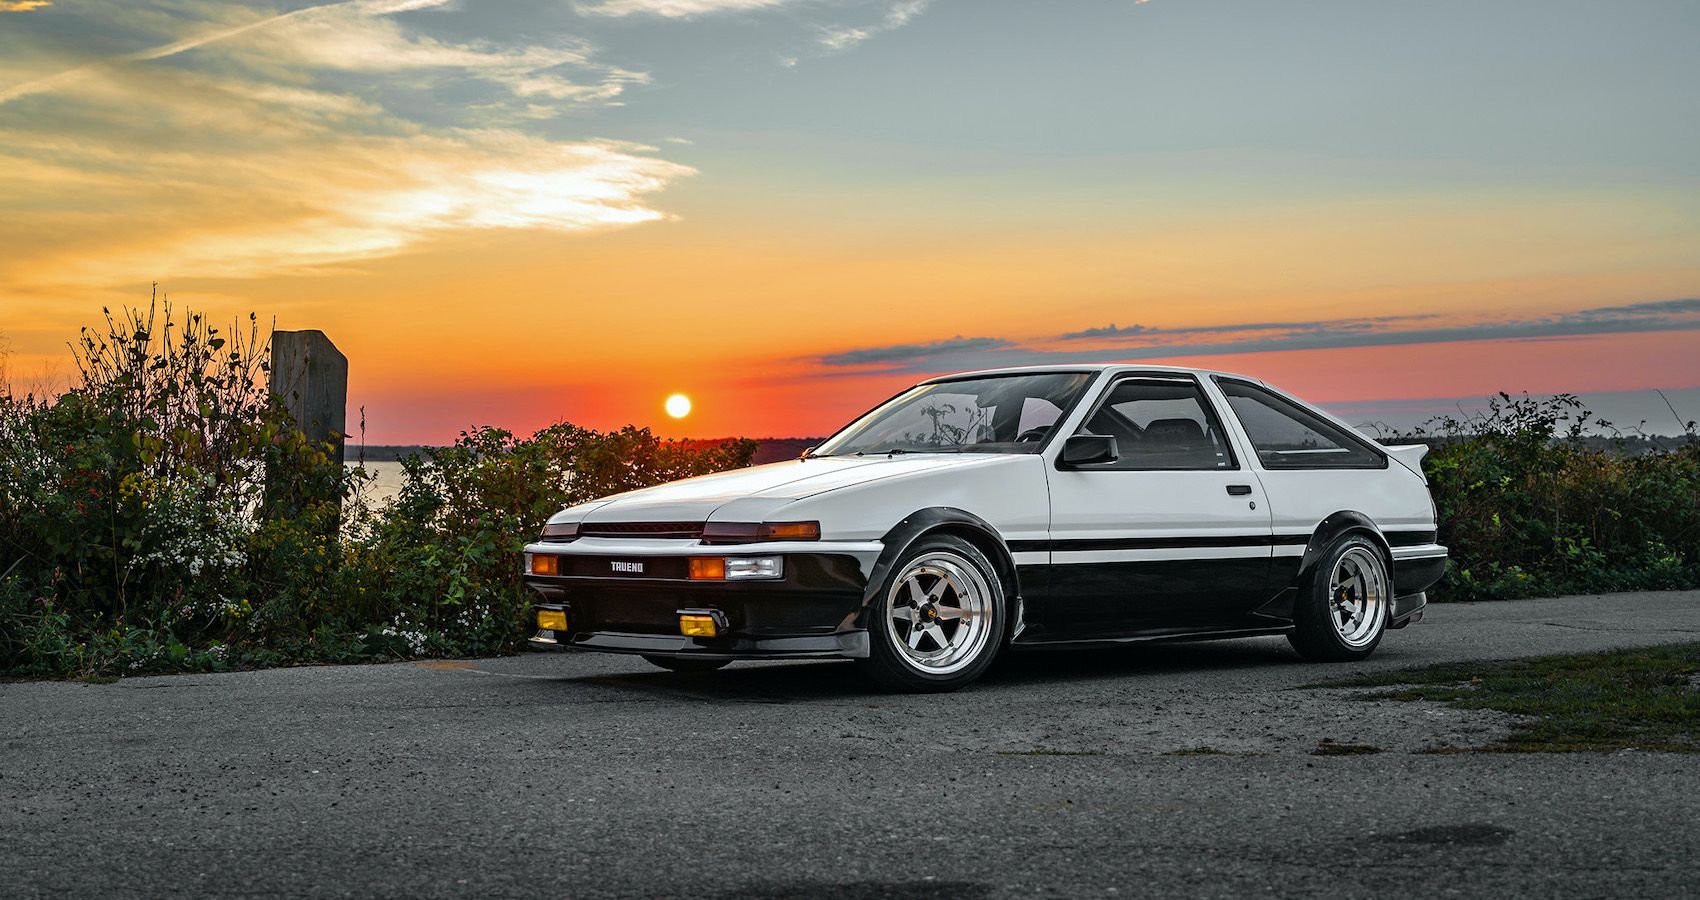 Here’s Why The Toyota Corolla AE86 Is A Very Reliable ‘80s Japanese Sports Car